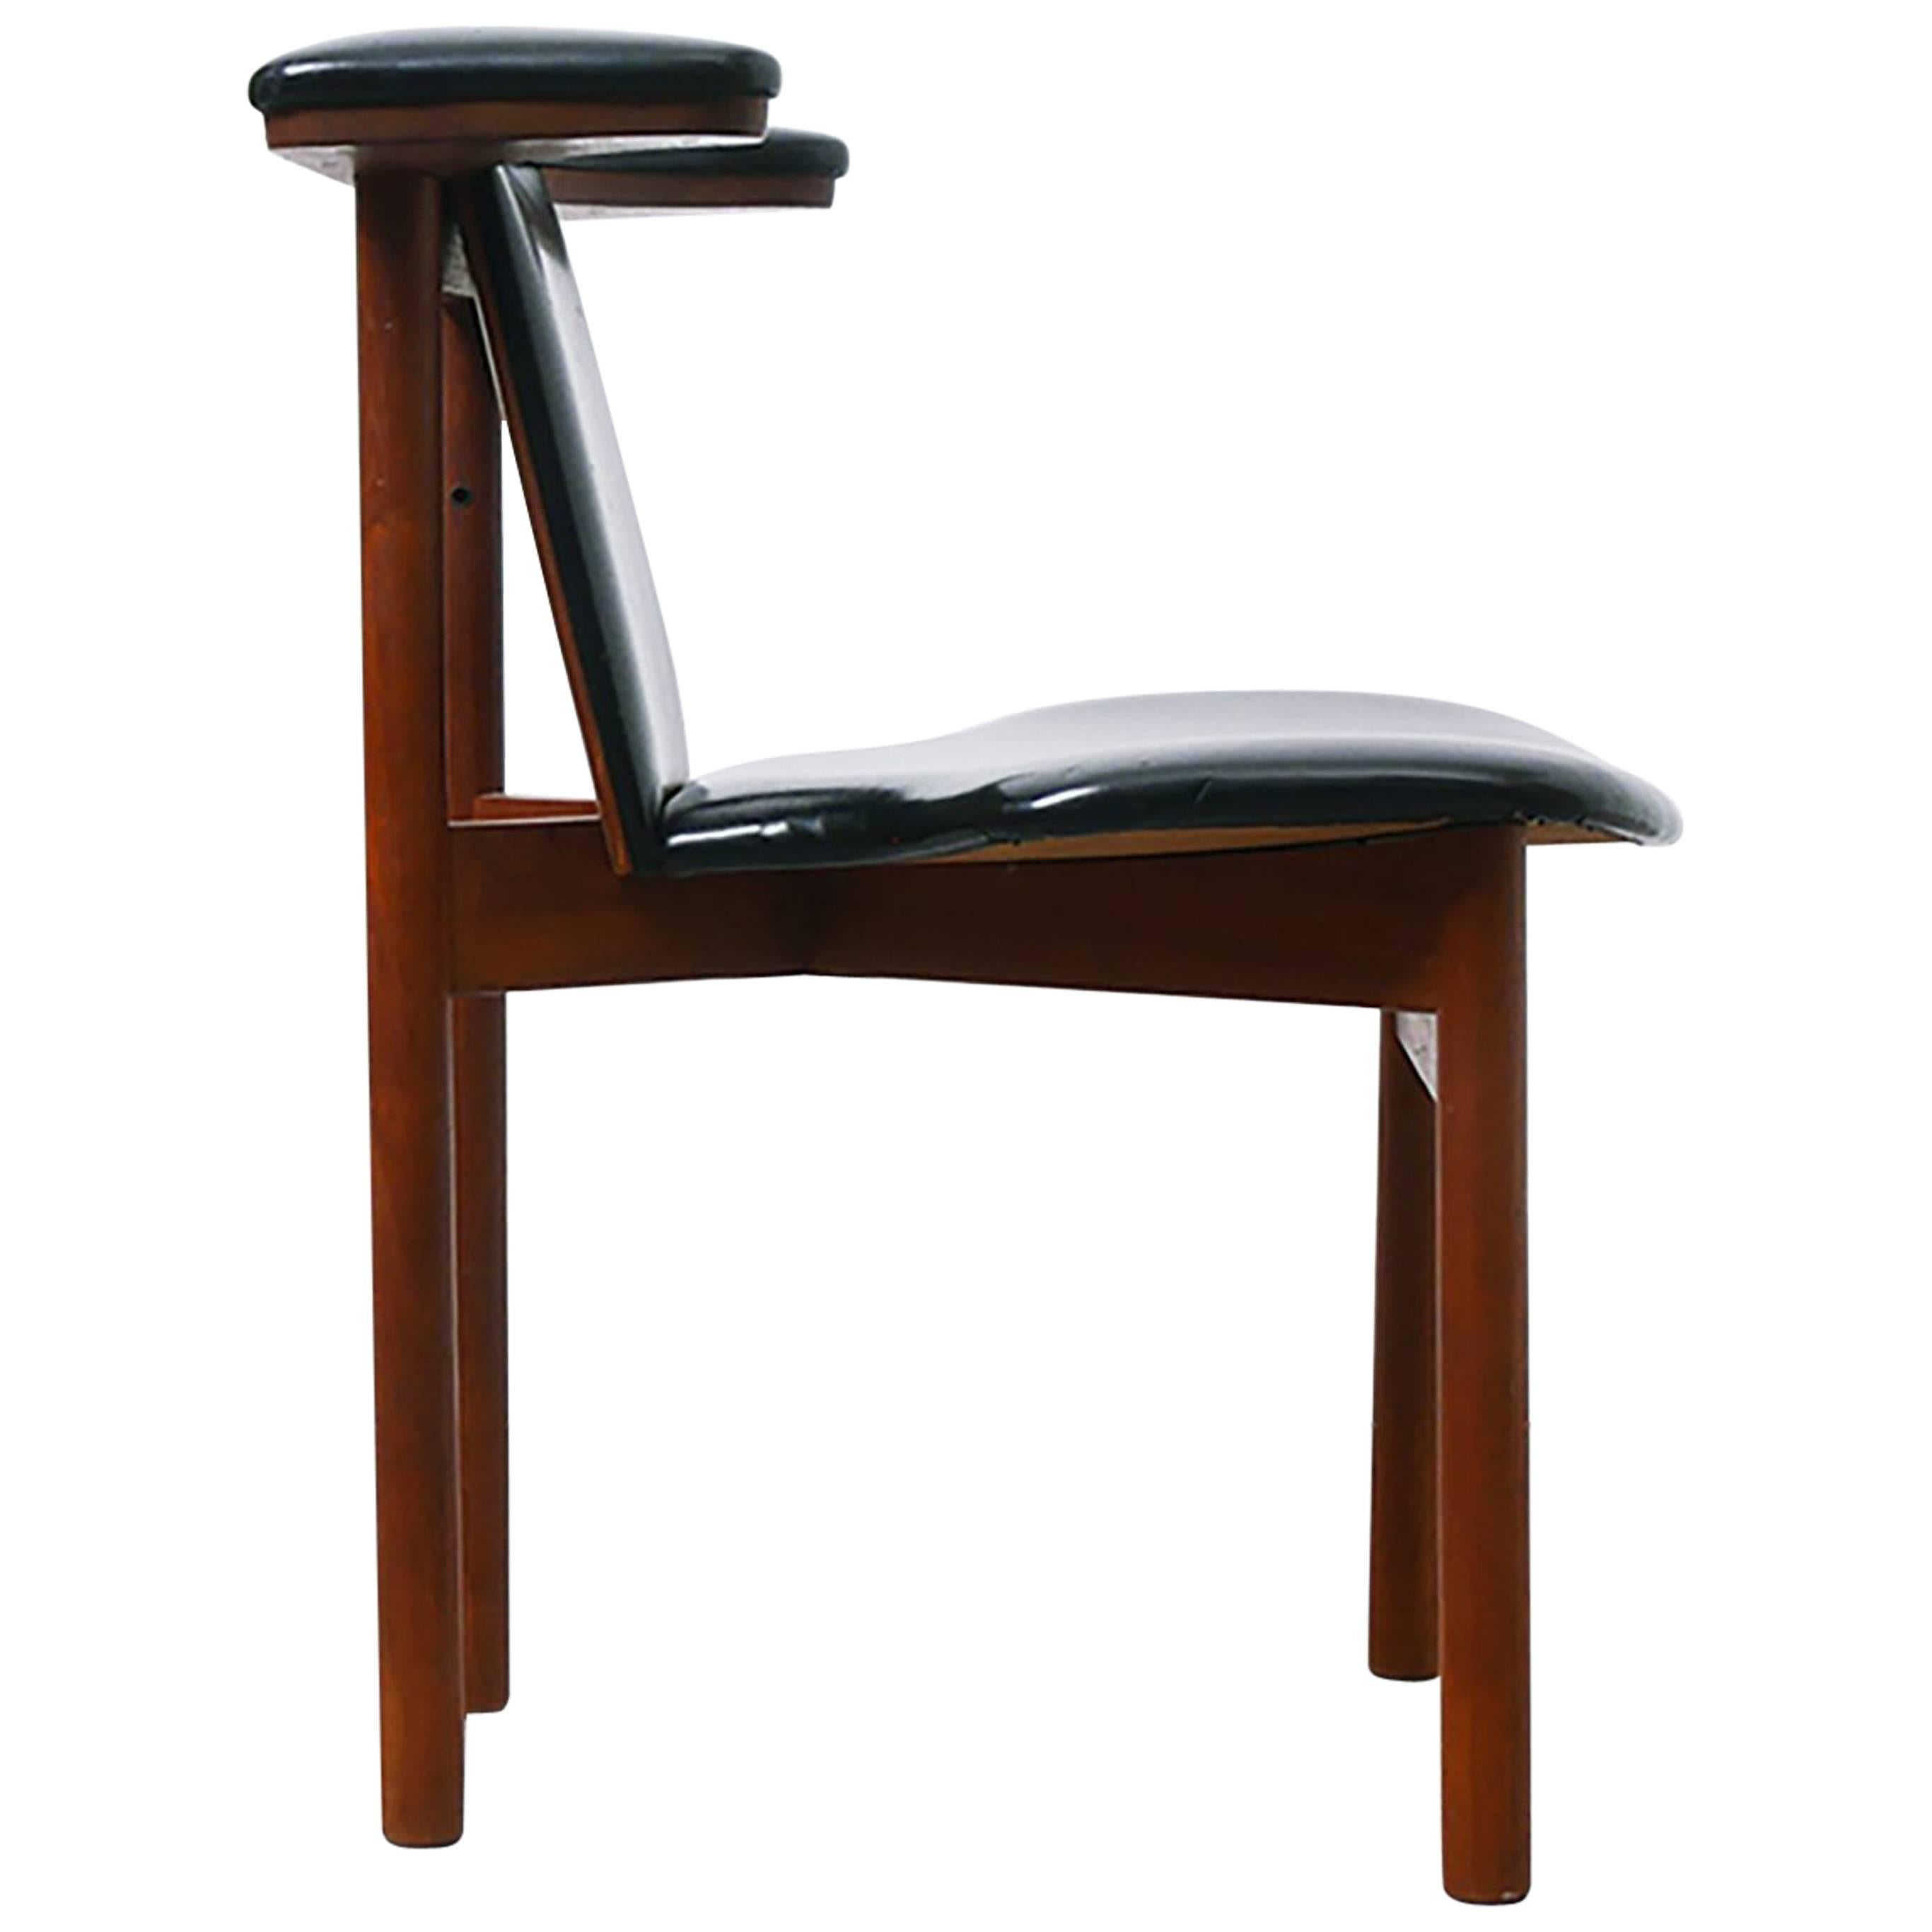 Hans Olsen "Frederik VII" Chair in Teck and Black Leatherette For Sale